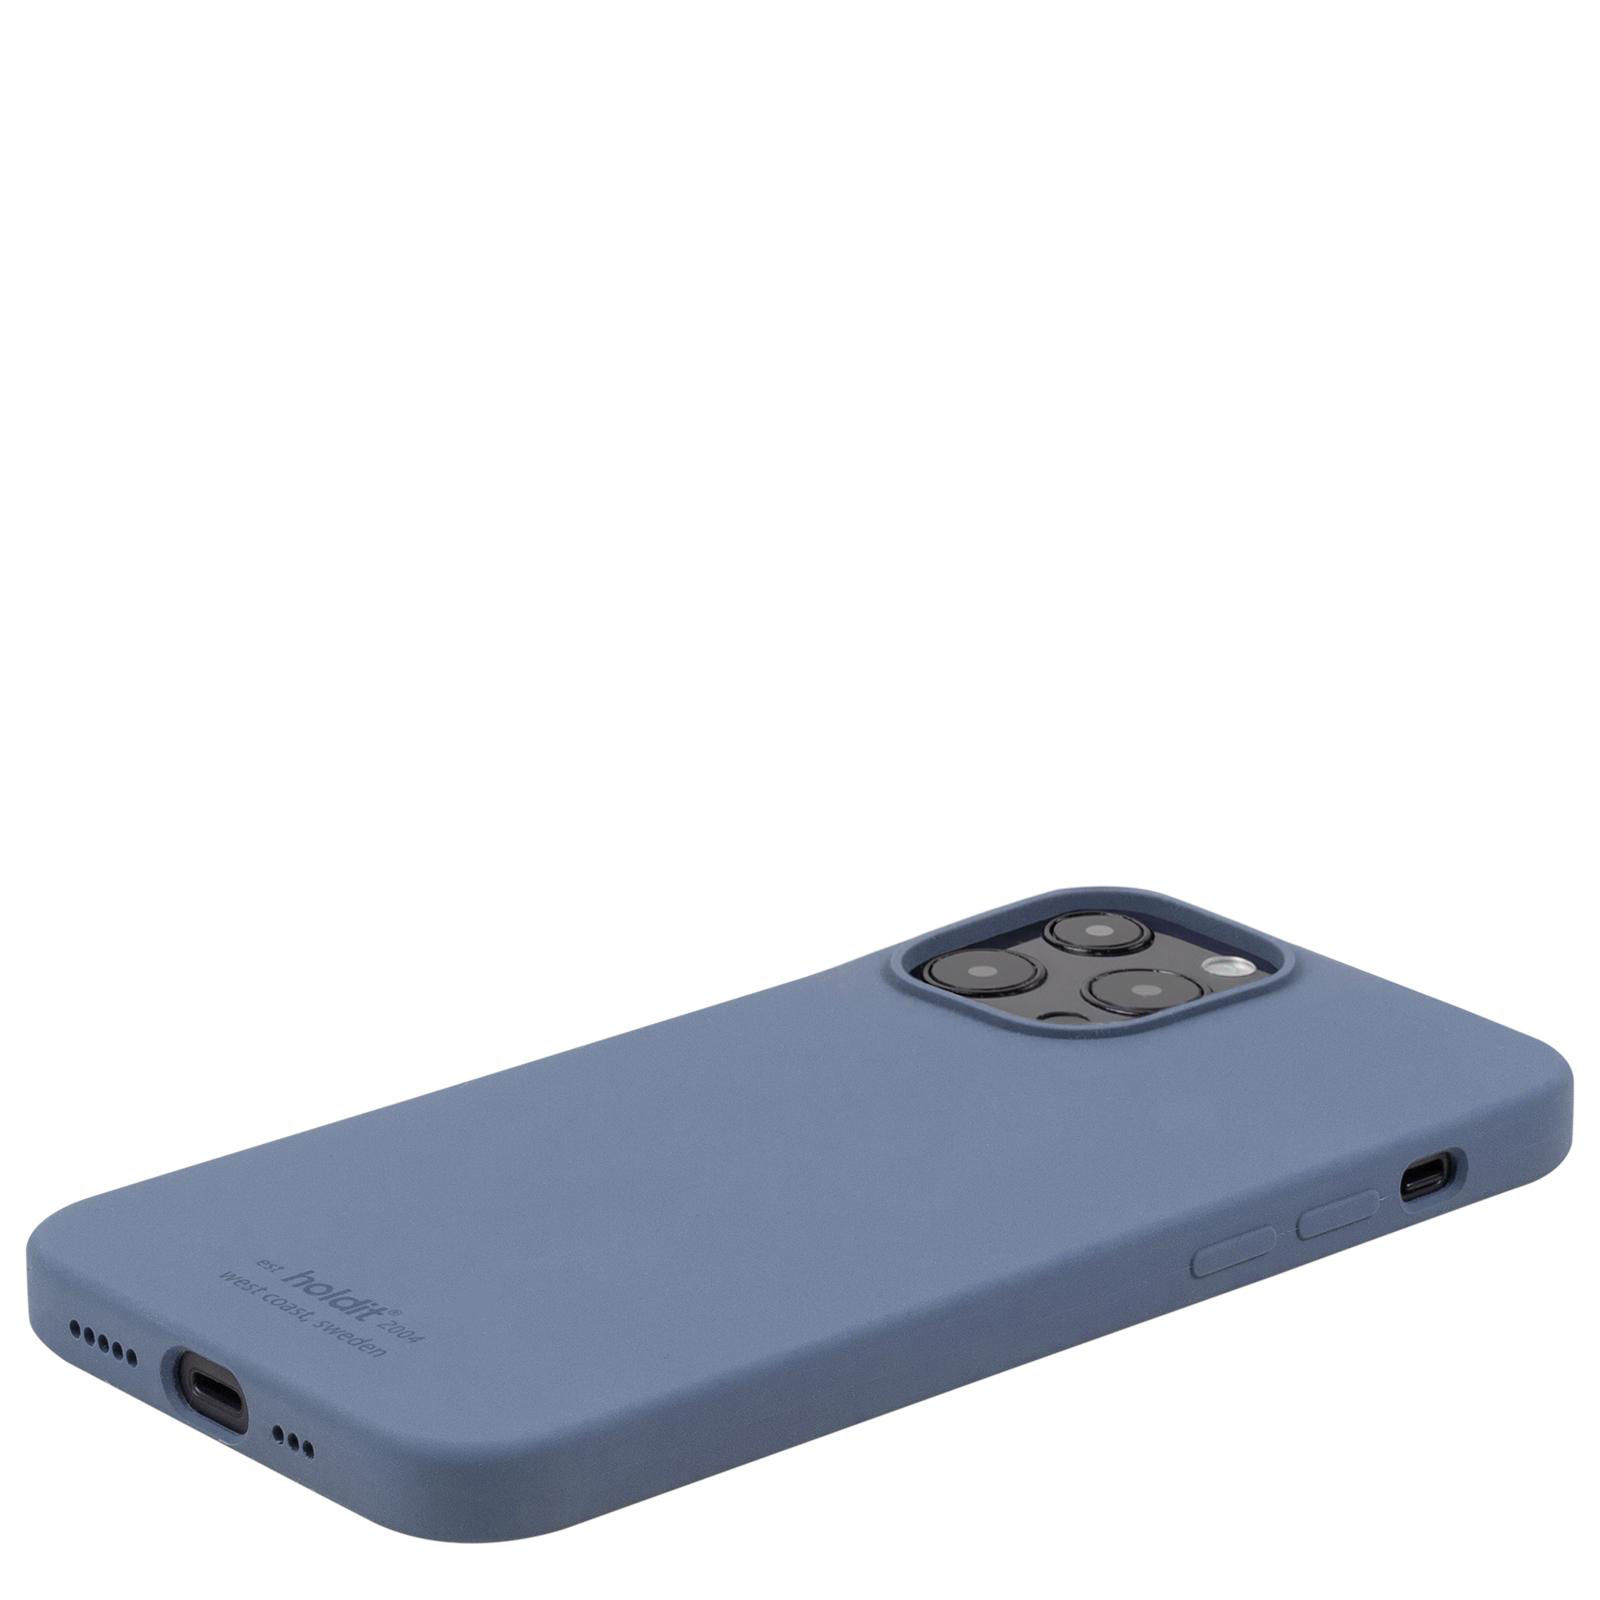 HOLDIT Silicone Case, Backcover, Apple, Pacific 13 Blue iPhone Pro